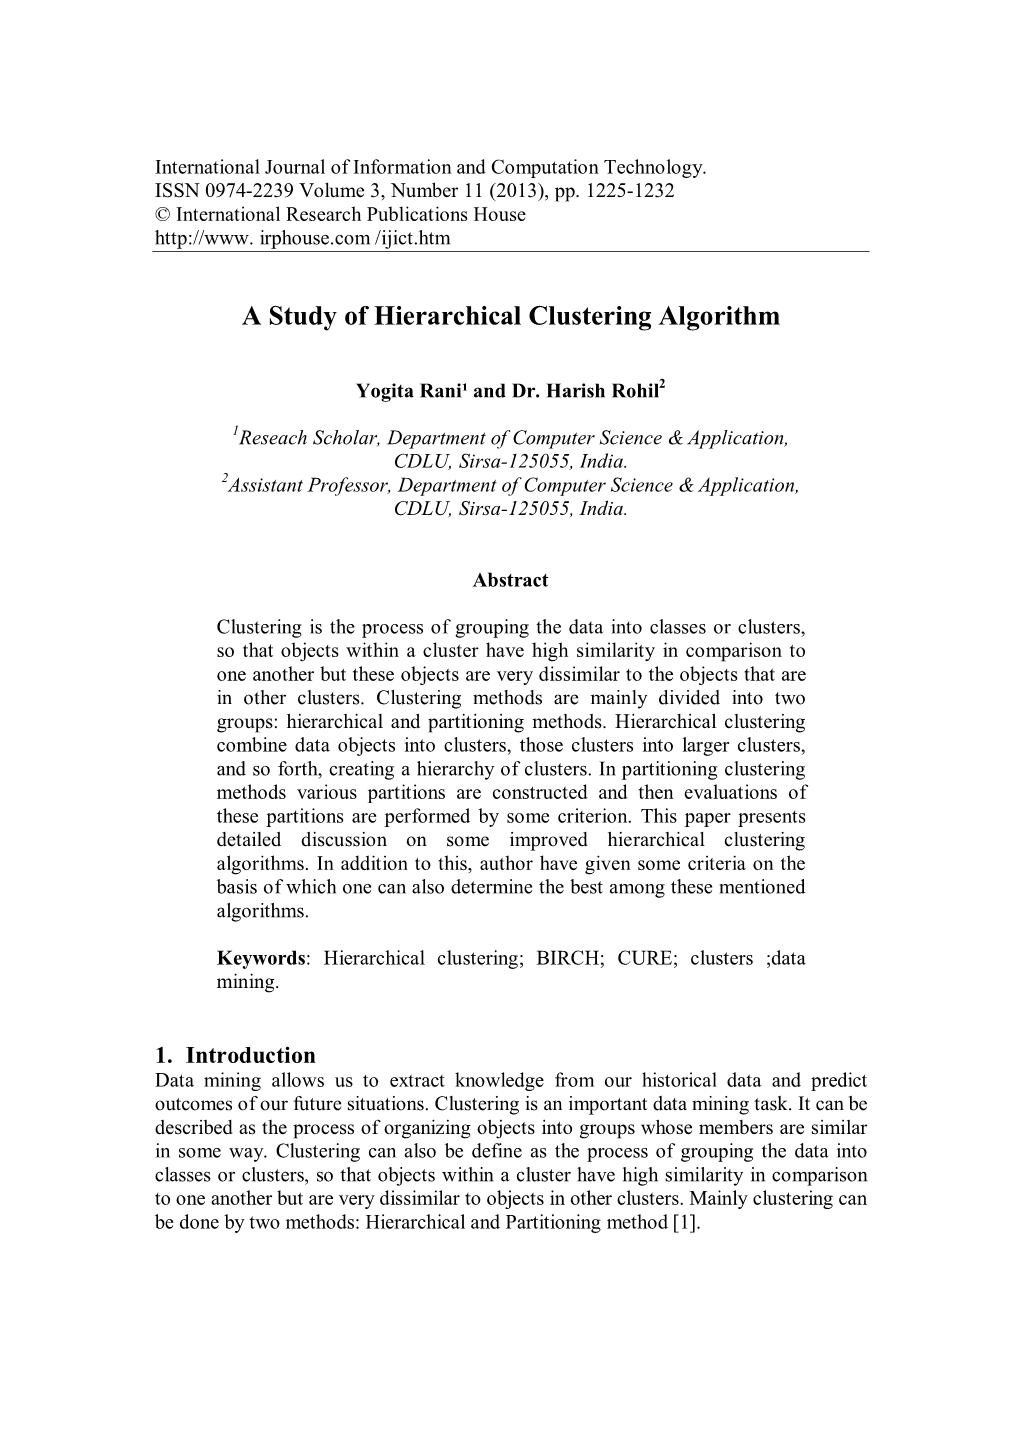 A Study of Hierarchical Clustering Algorithm